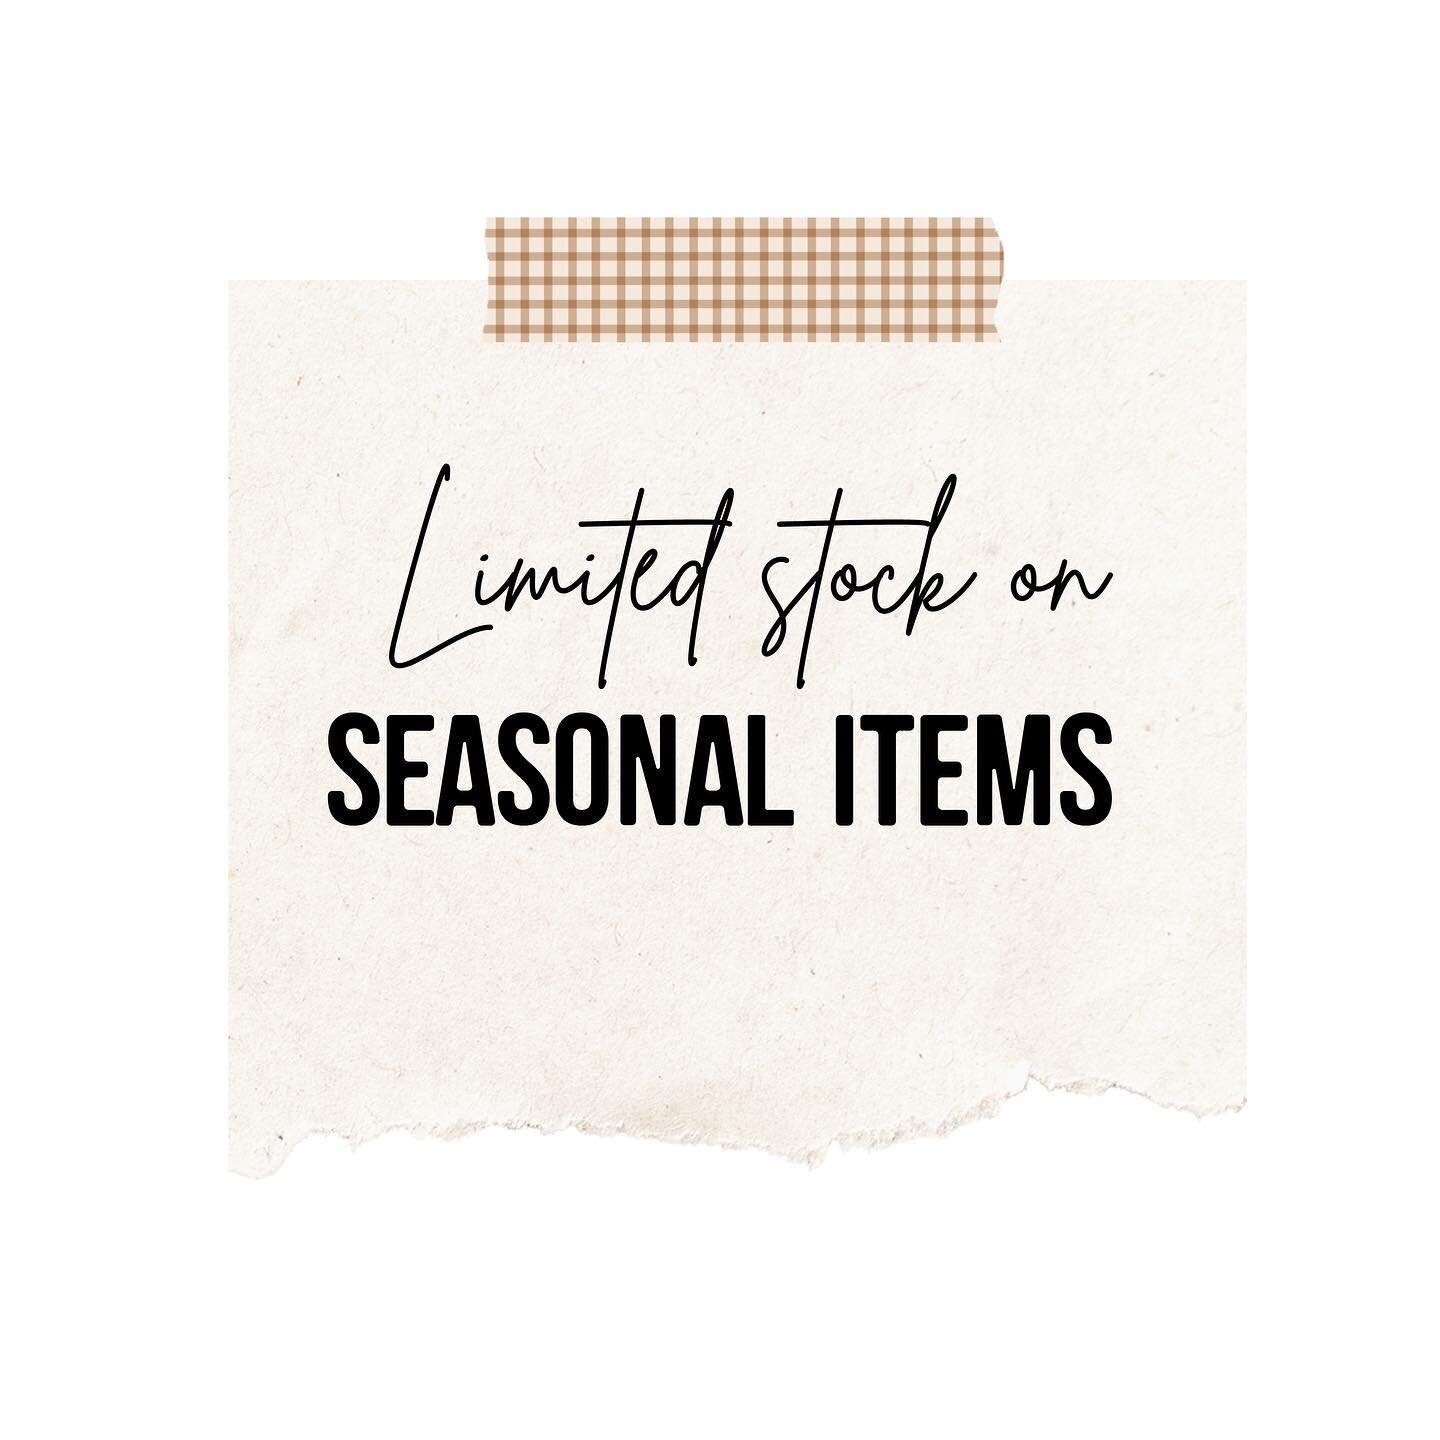 We have a limited stock on seasonal items 🍁 so come get it while we have it!!